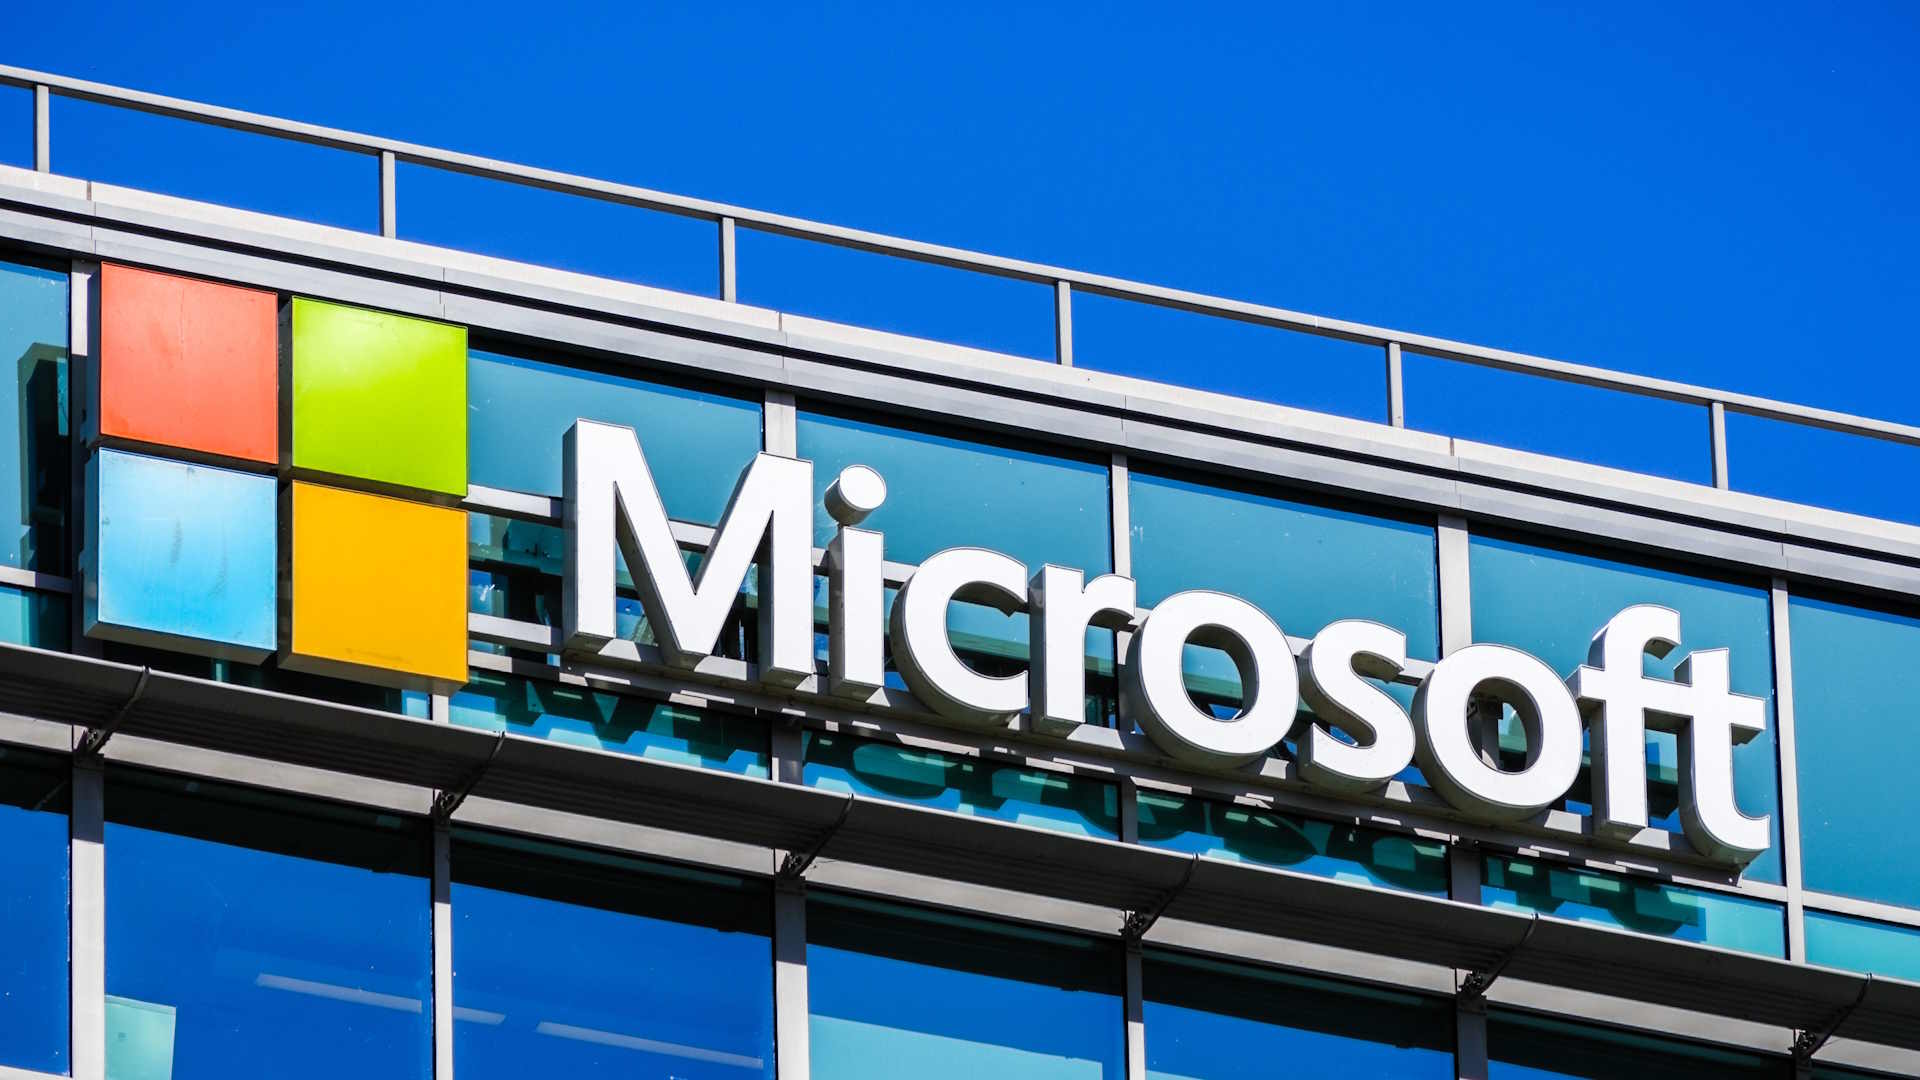 Microsoft replaces Apple and becomes the world’s largest company by market capitalization